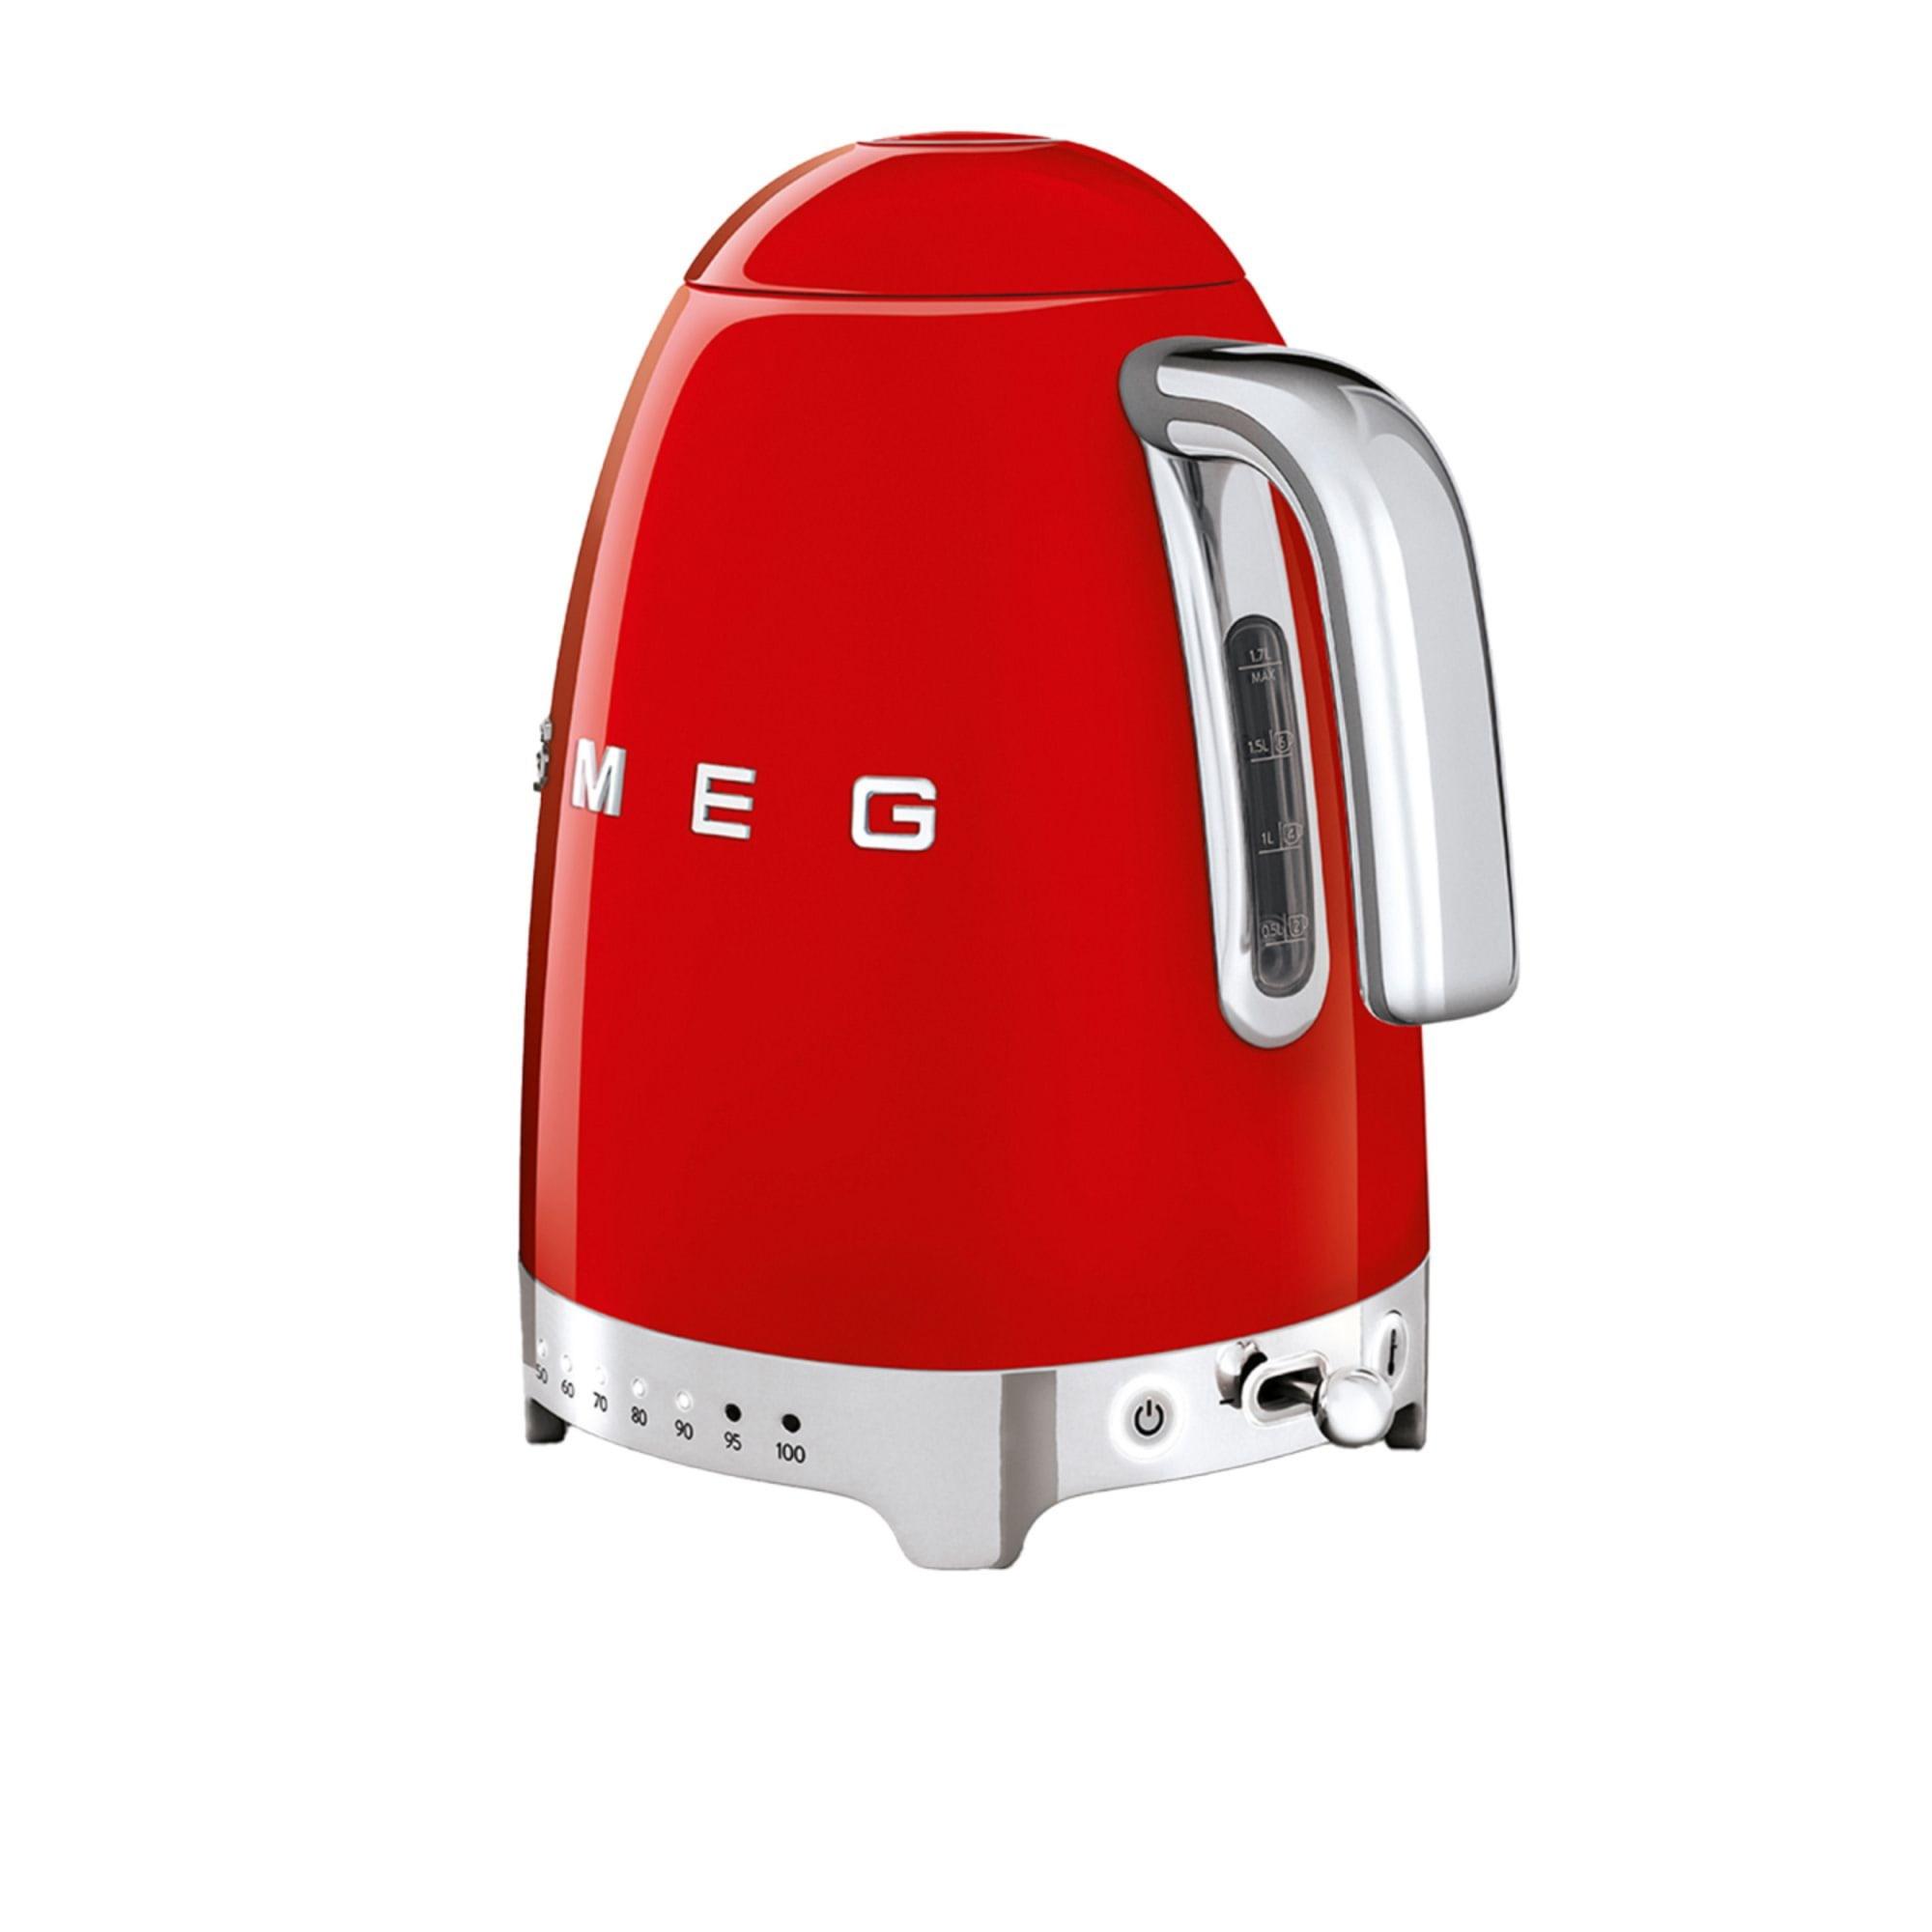 Smeg 50s Retro Style Variable Temperature Kettle 1 7L Red Image 3